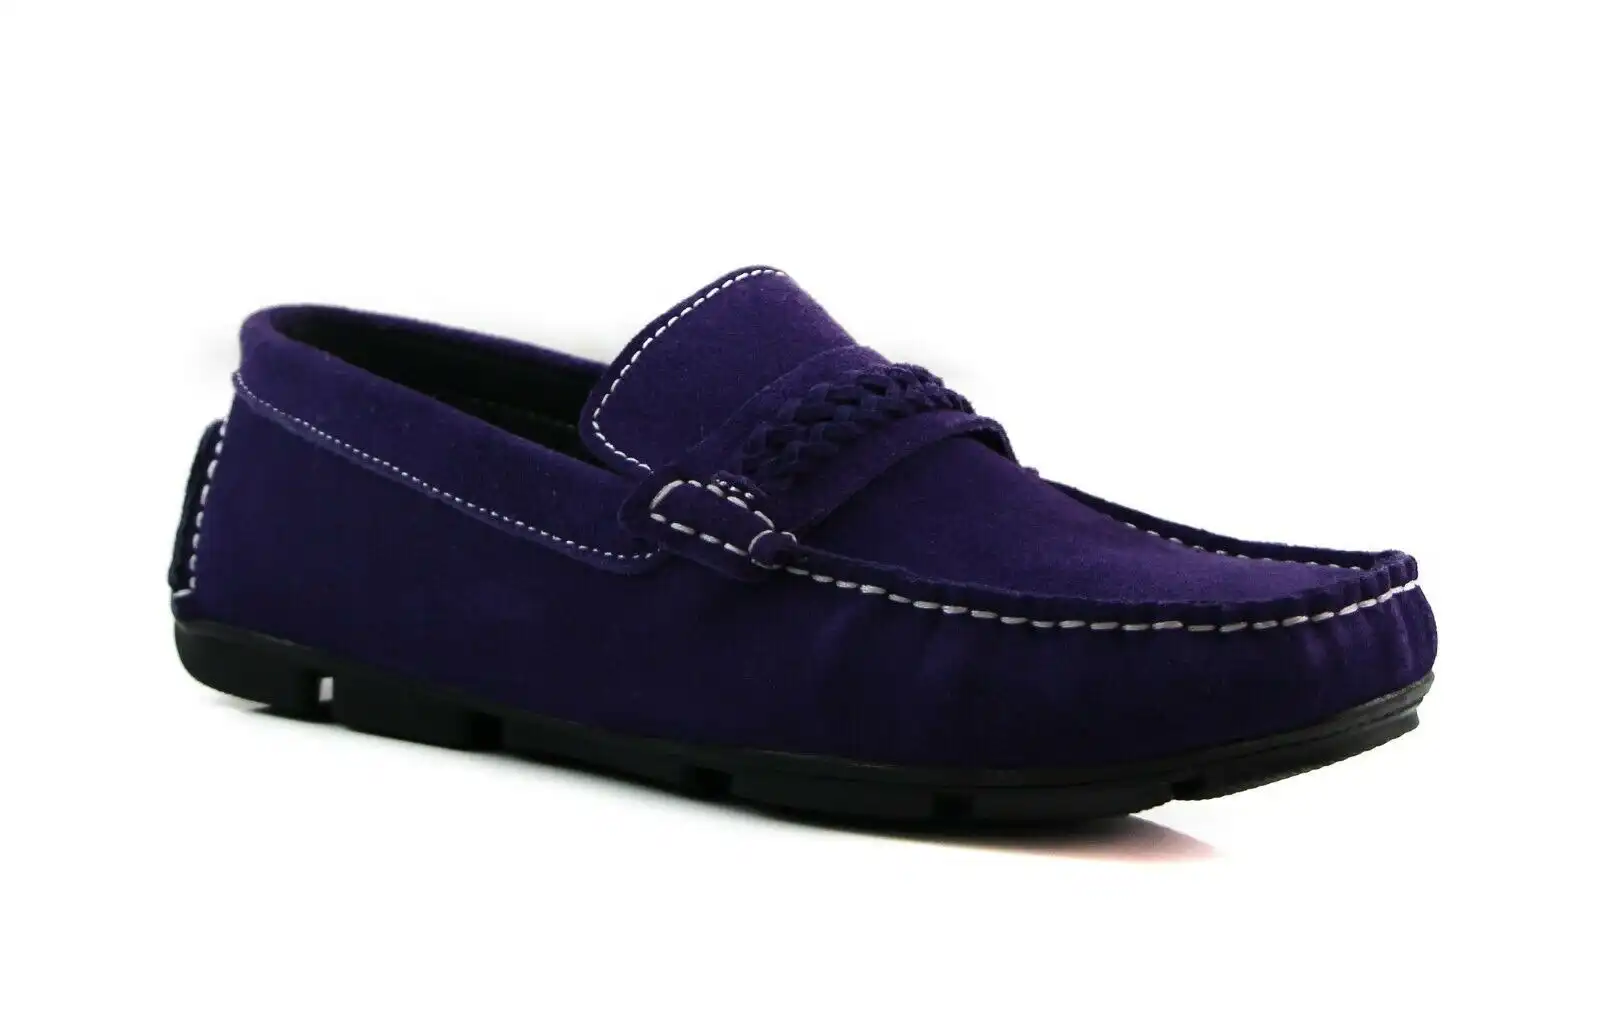 Mens Zasel Cruze Purple Suede Leather Casual Boat Deck Loafers Shoes